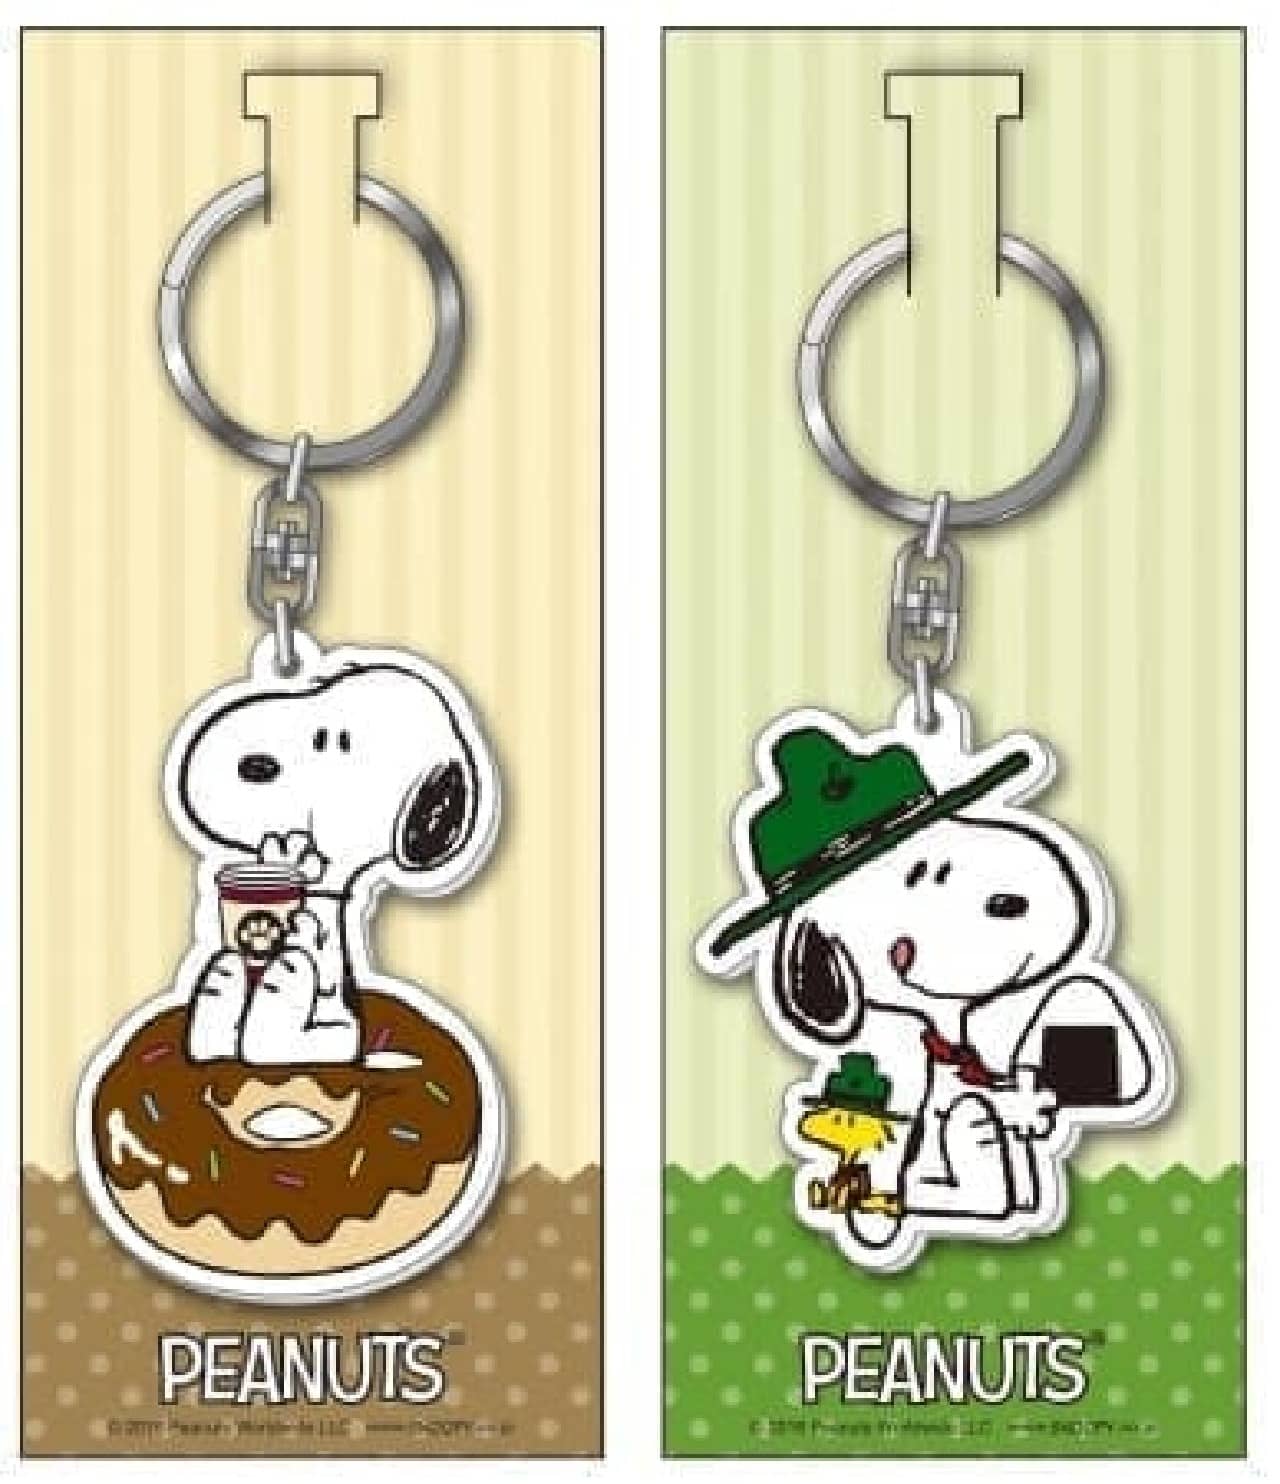 Lawson limited SNOOPY rubber key chain